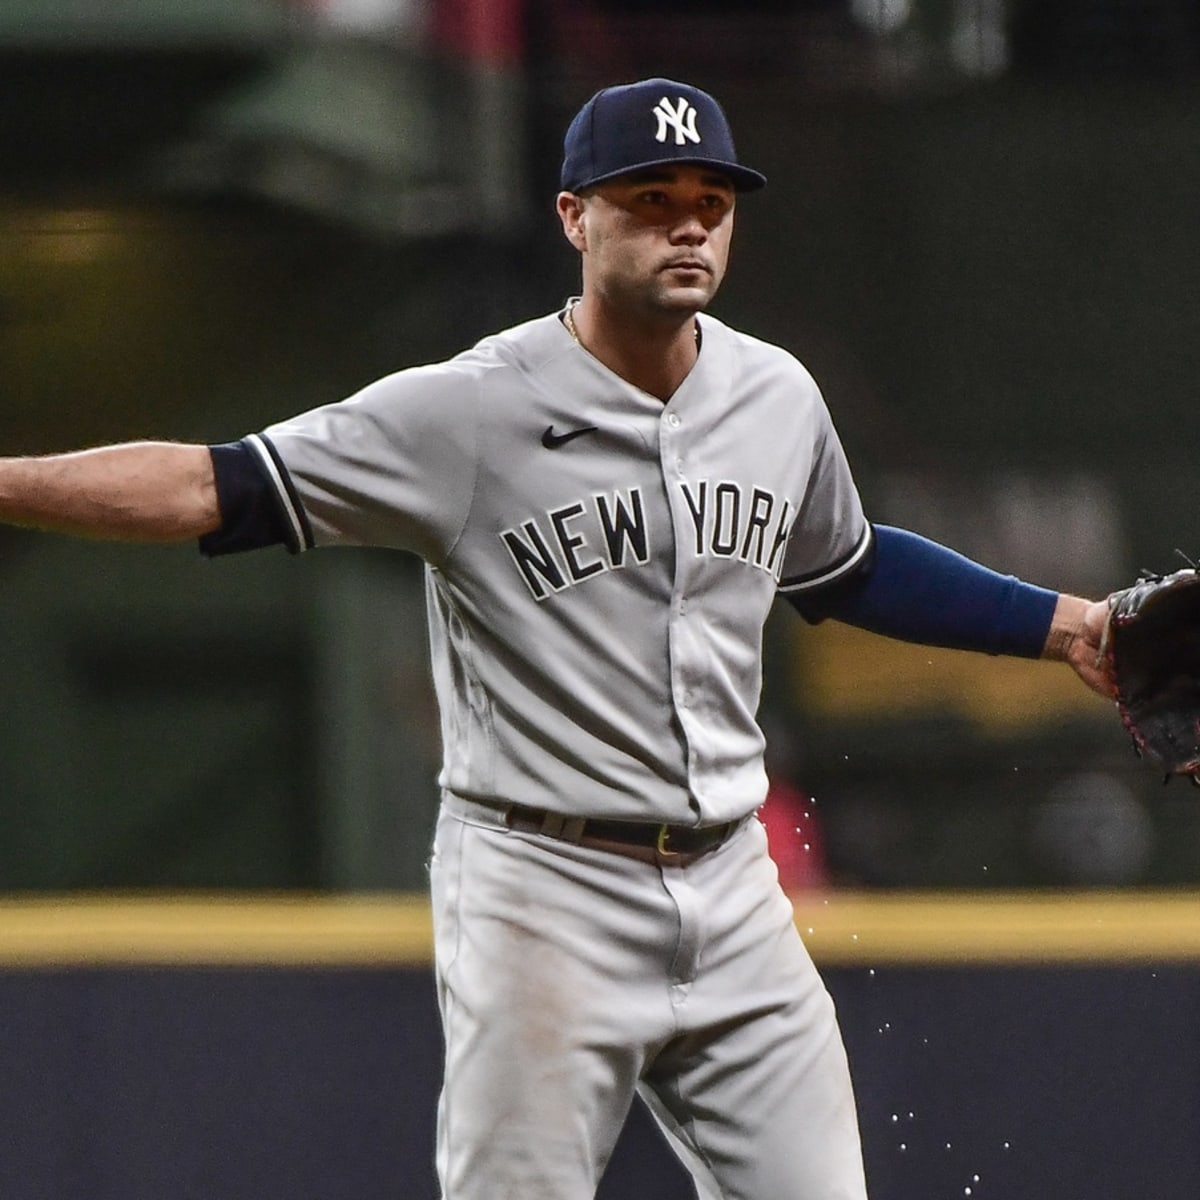 Why Game 5 could spark an offseason of Yankees changes